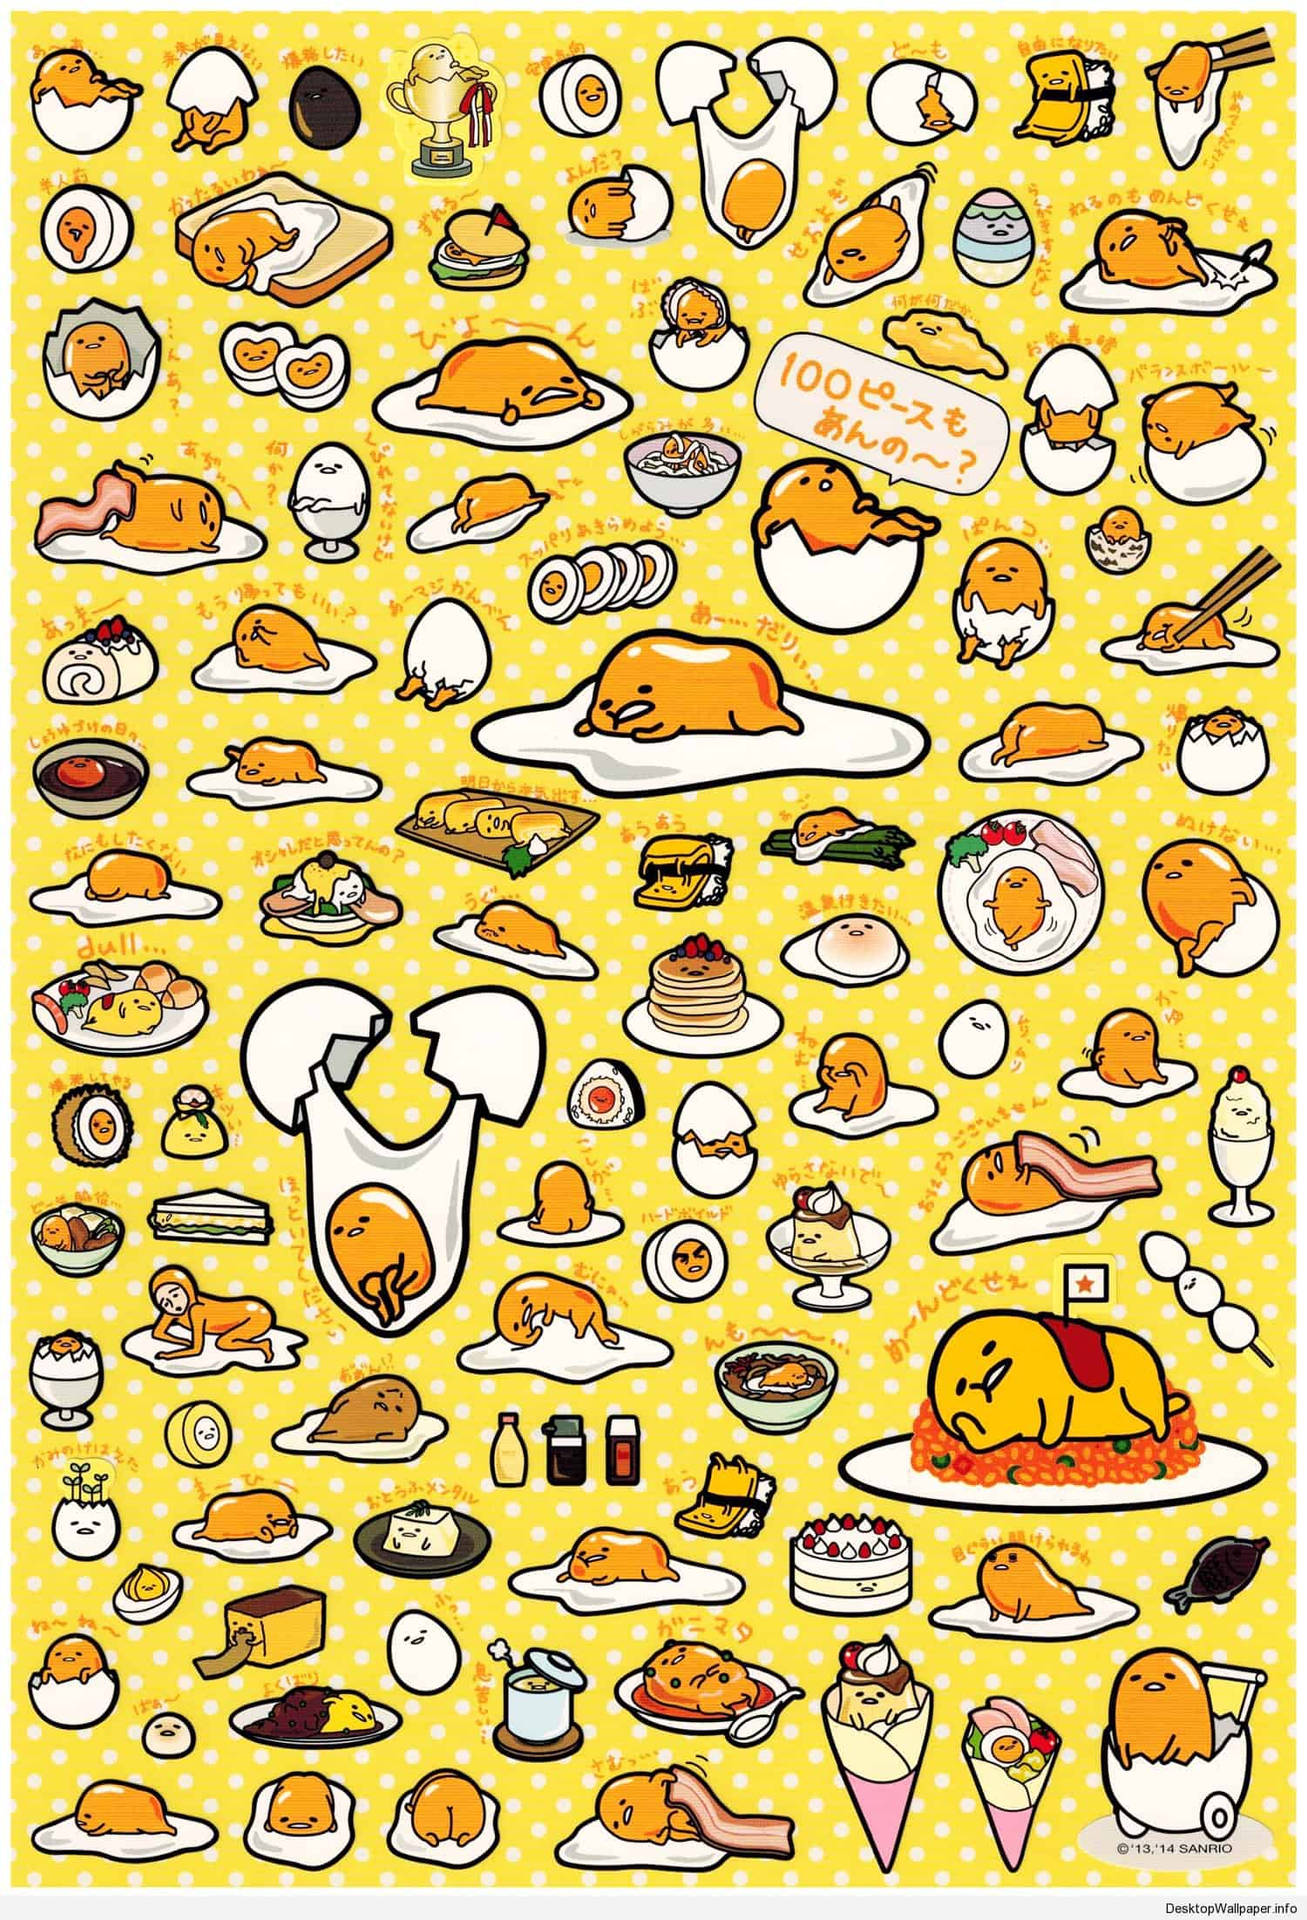 "Be Lazy and Enjoy the Gudetama Aesthetic" Wallpaper